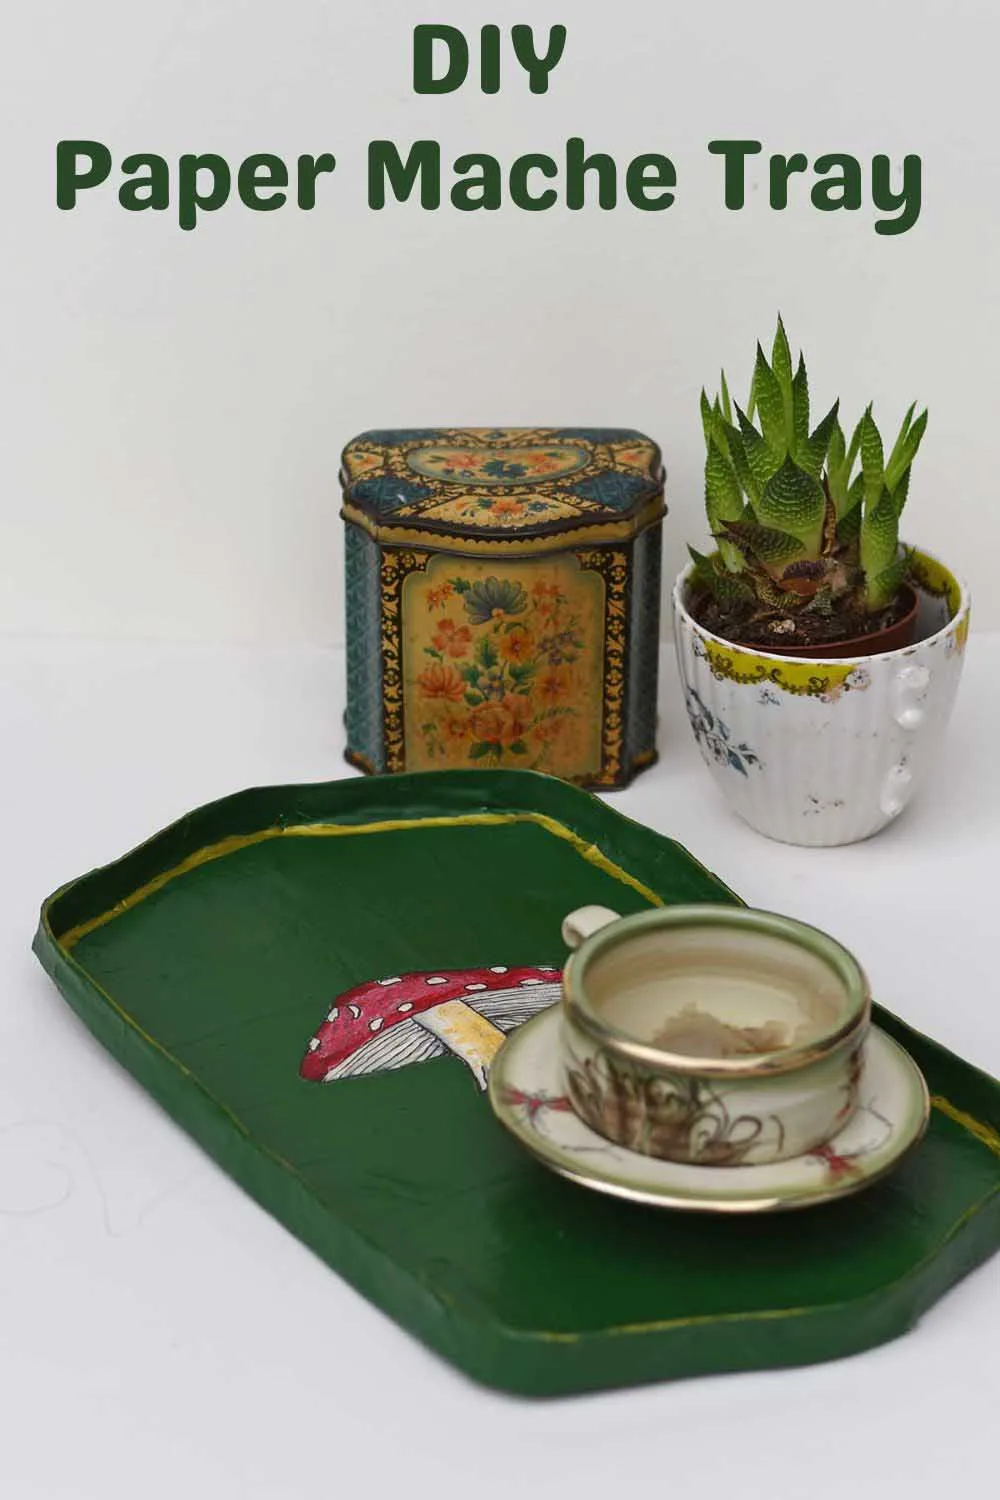 DIY paper mache tray with tea cup and caddy and plant in background